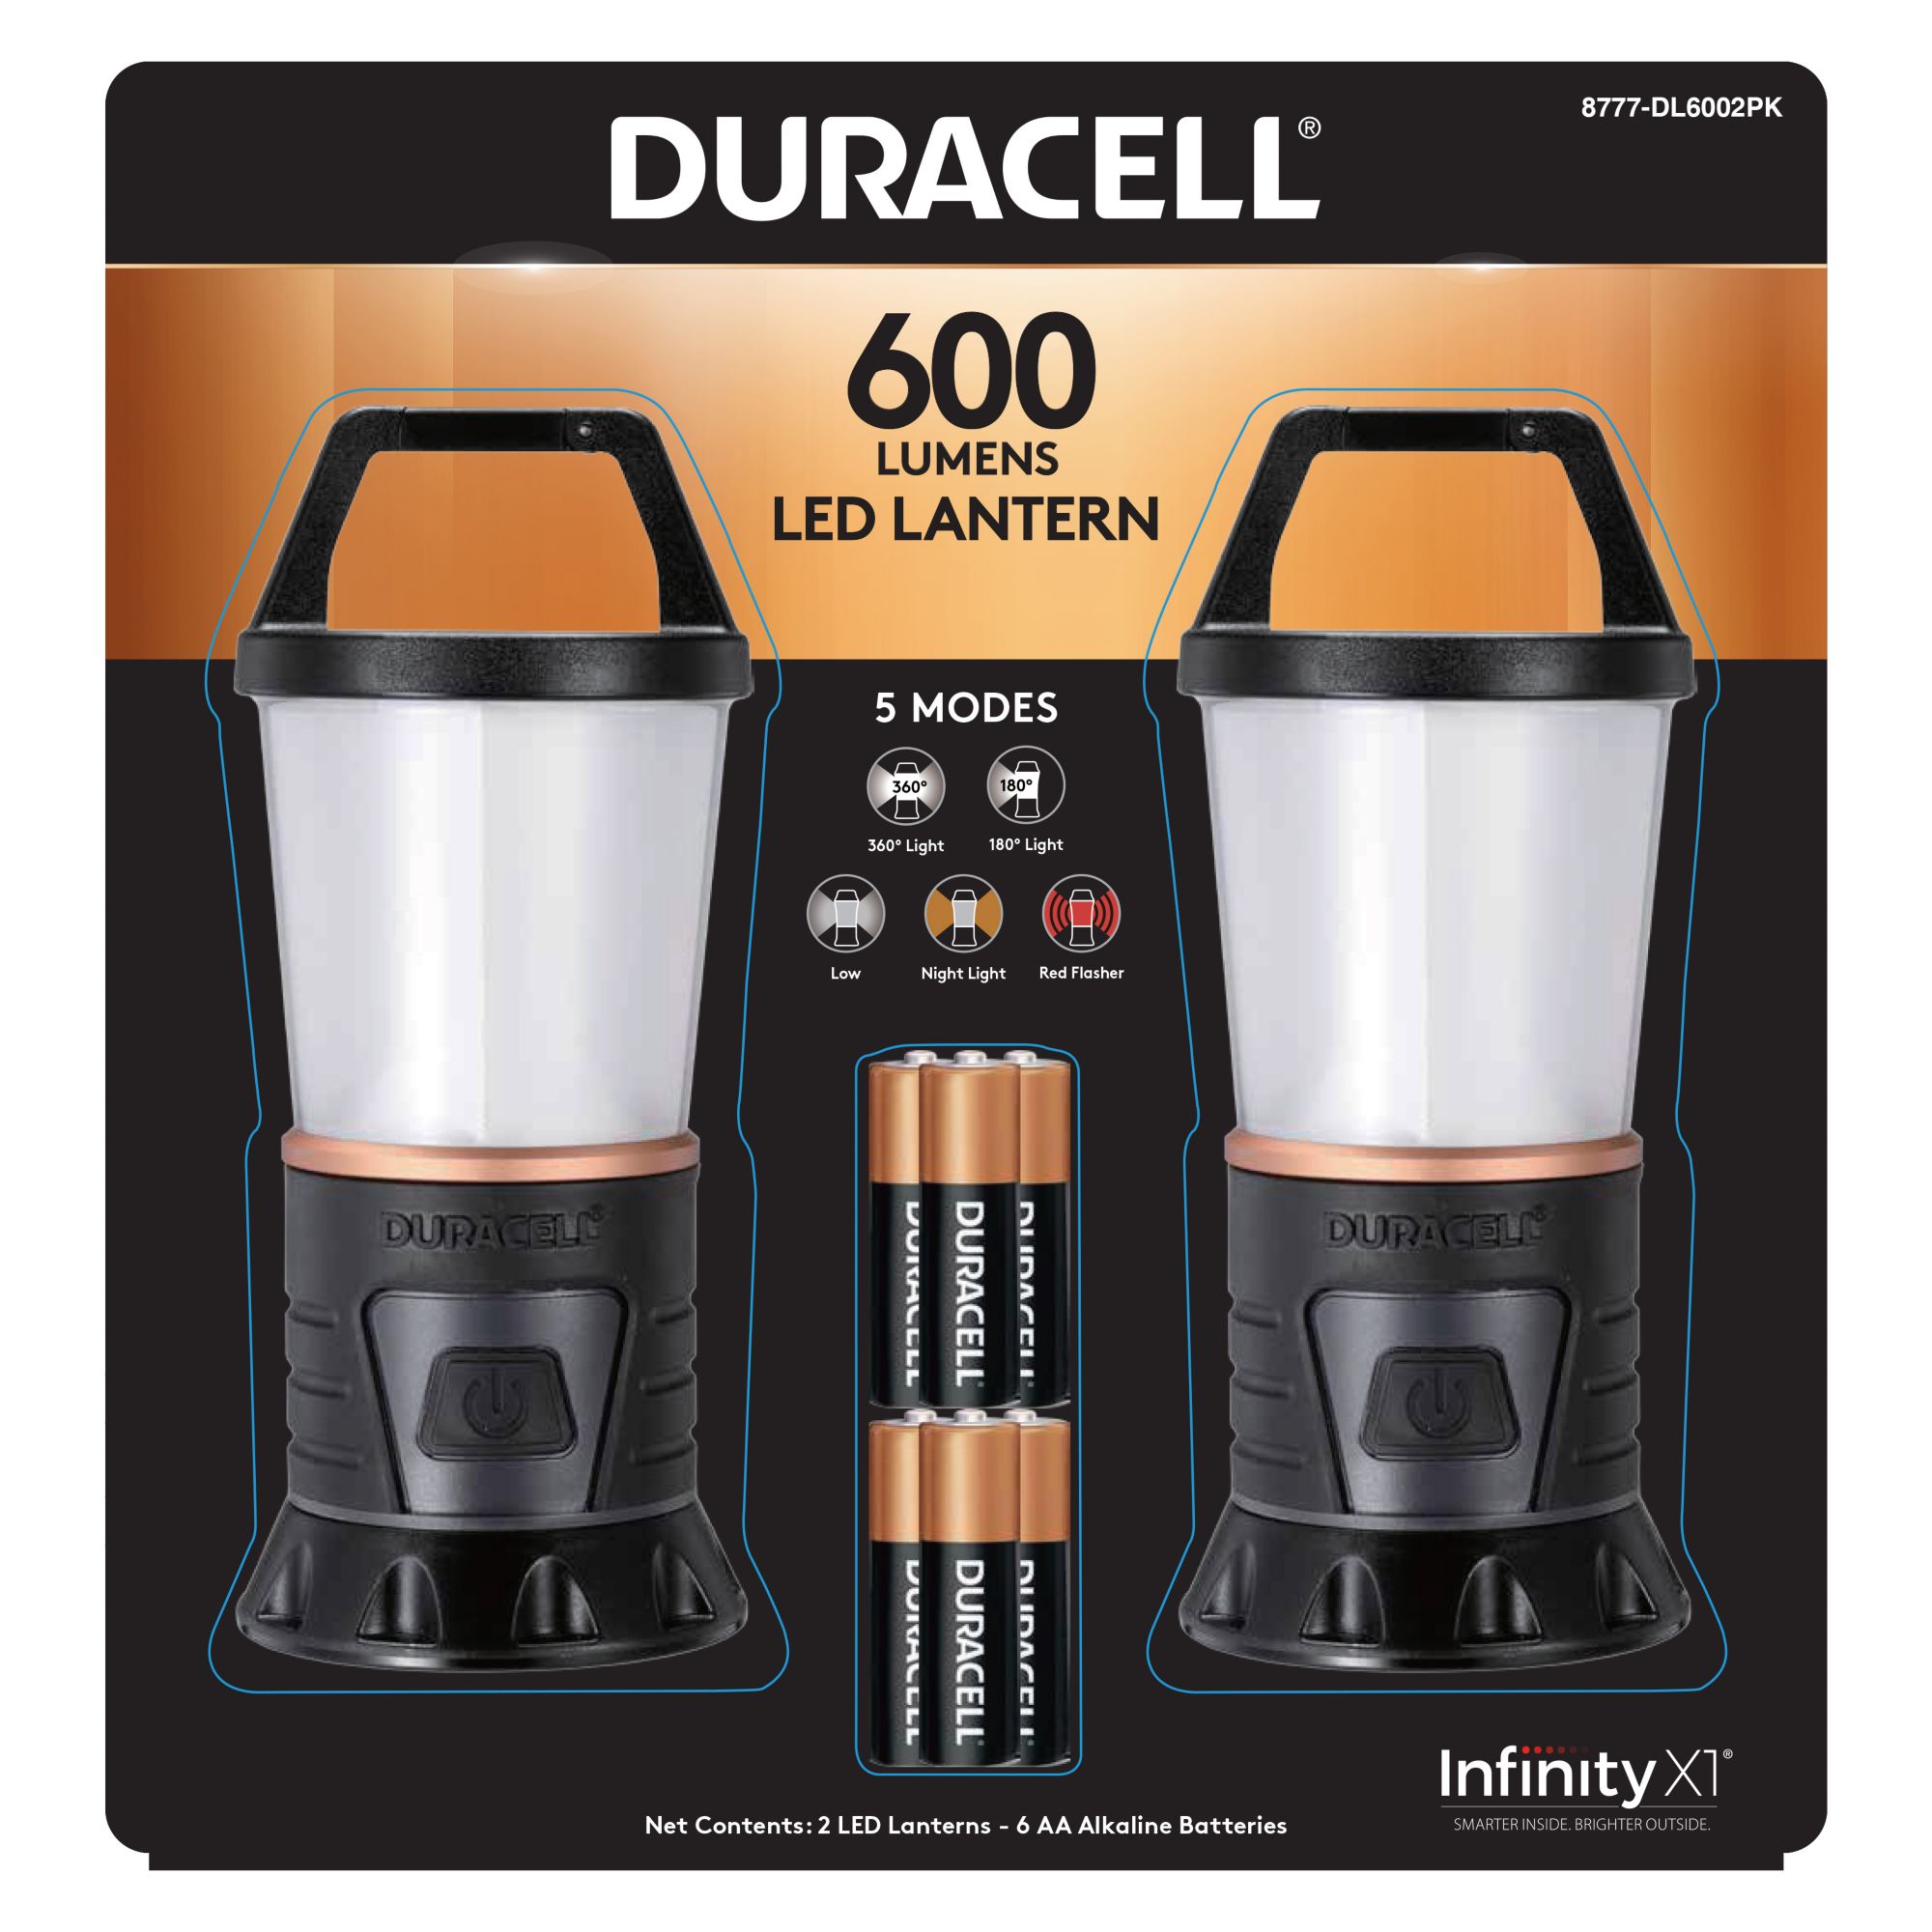 Duracell 600 Lumen LED Lantern with 360° & 180° lighting for Camping,  Fishing, & Emergency Use - 5 Modes and 3-AA Batteries Included